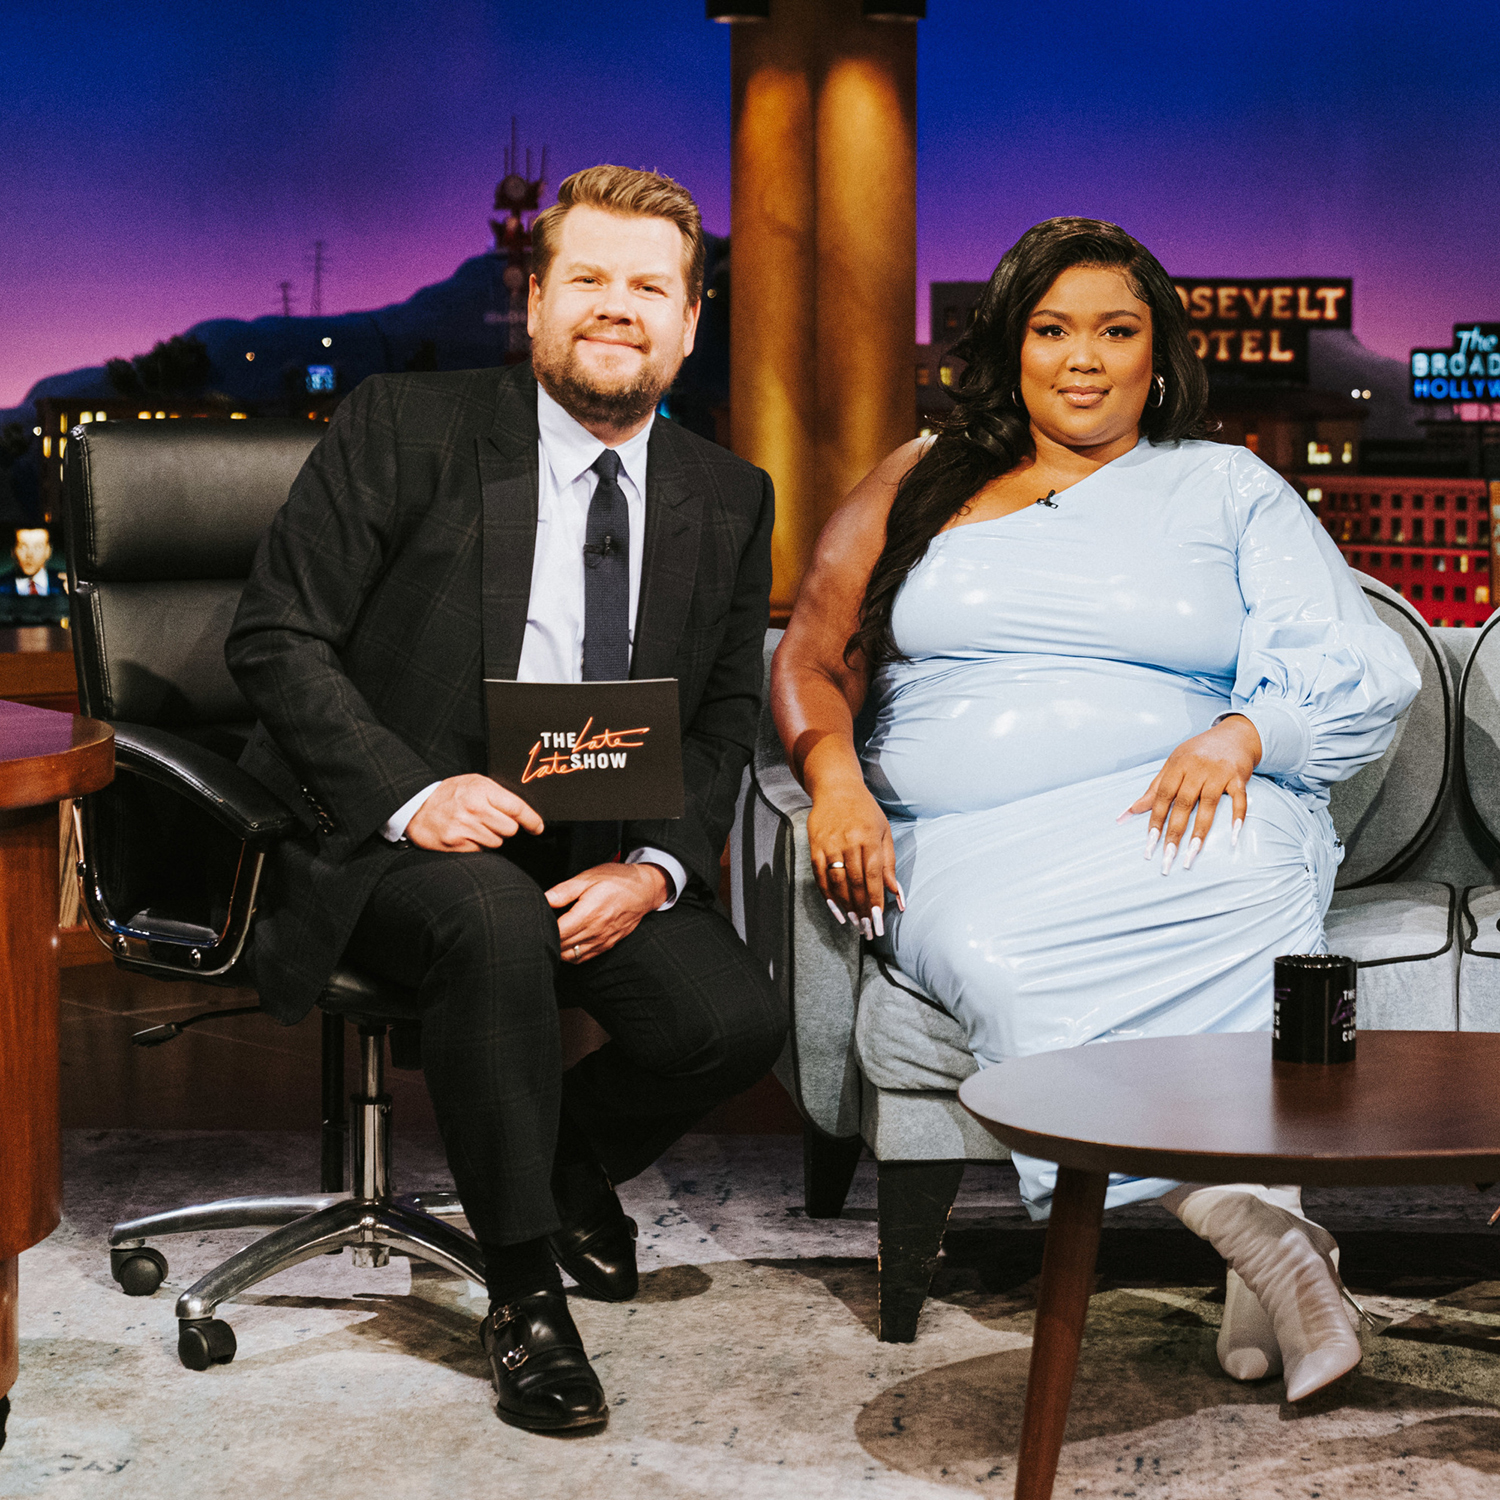 James Corden Announces His Departure from The Late Late Show: 'A Really Hard Decision'